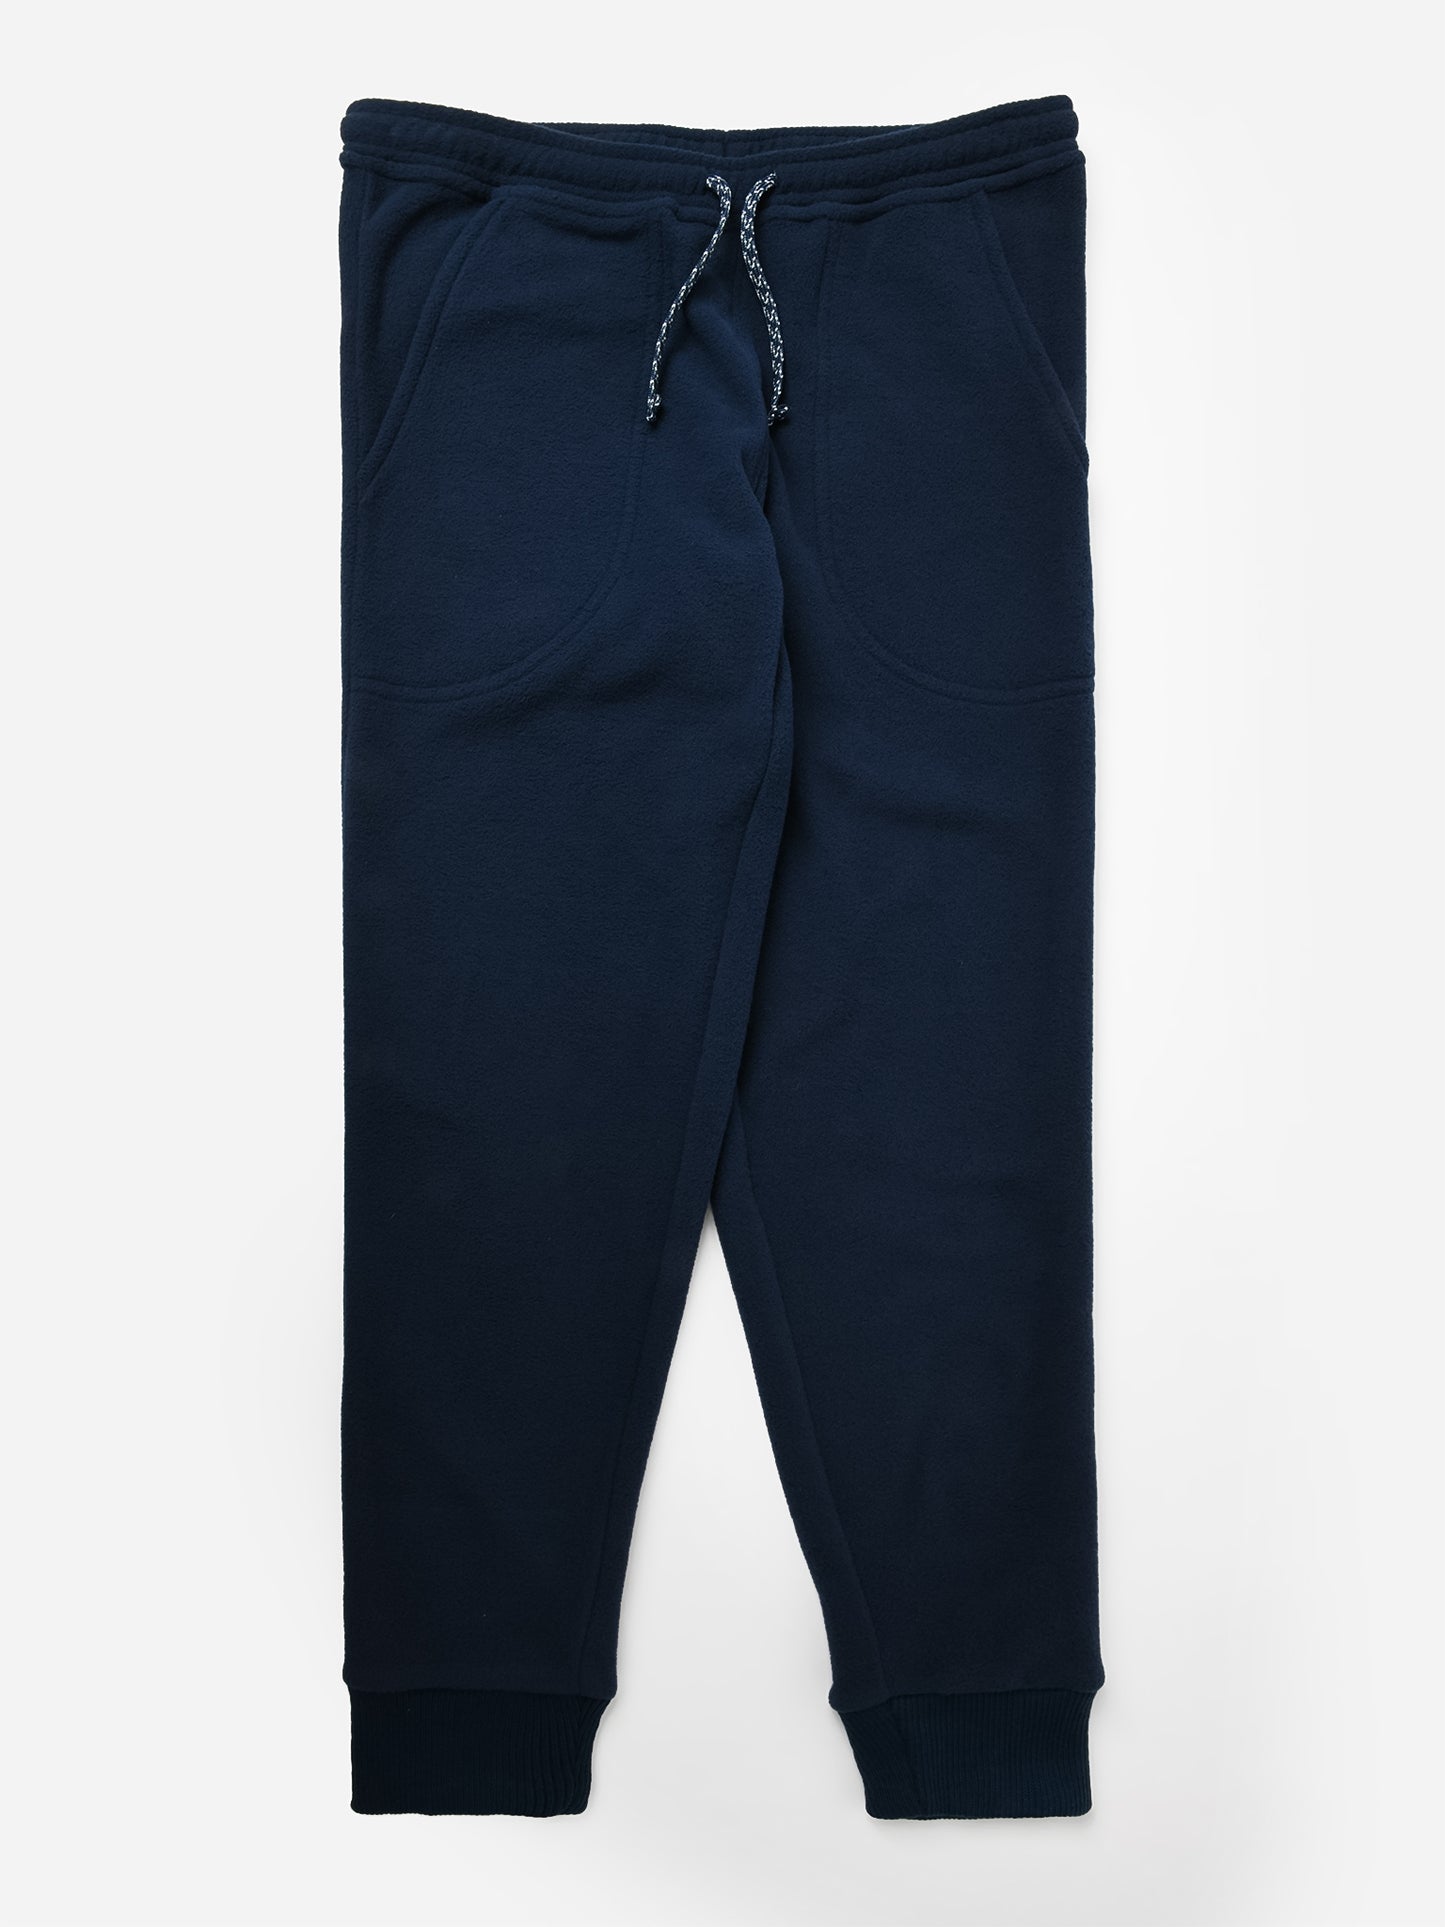 Patagonia Micro D Joggers - Youth